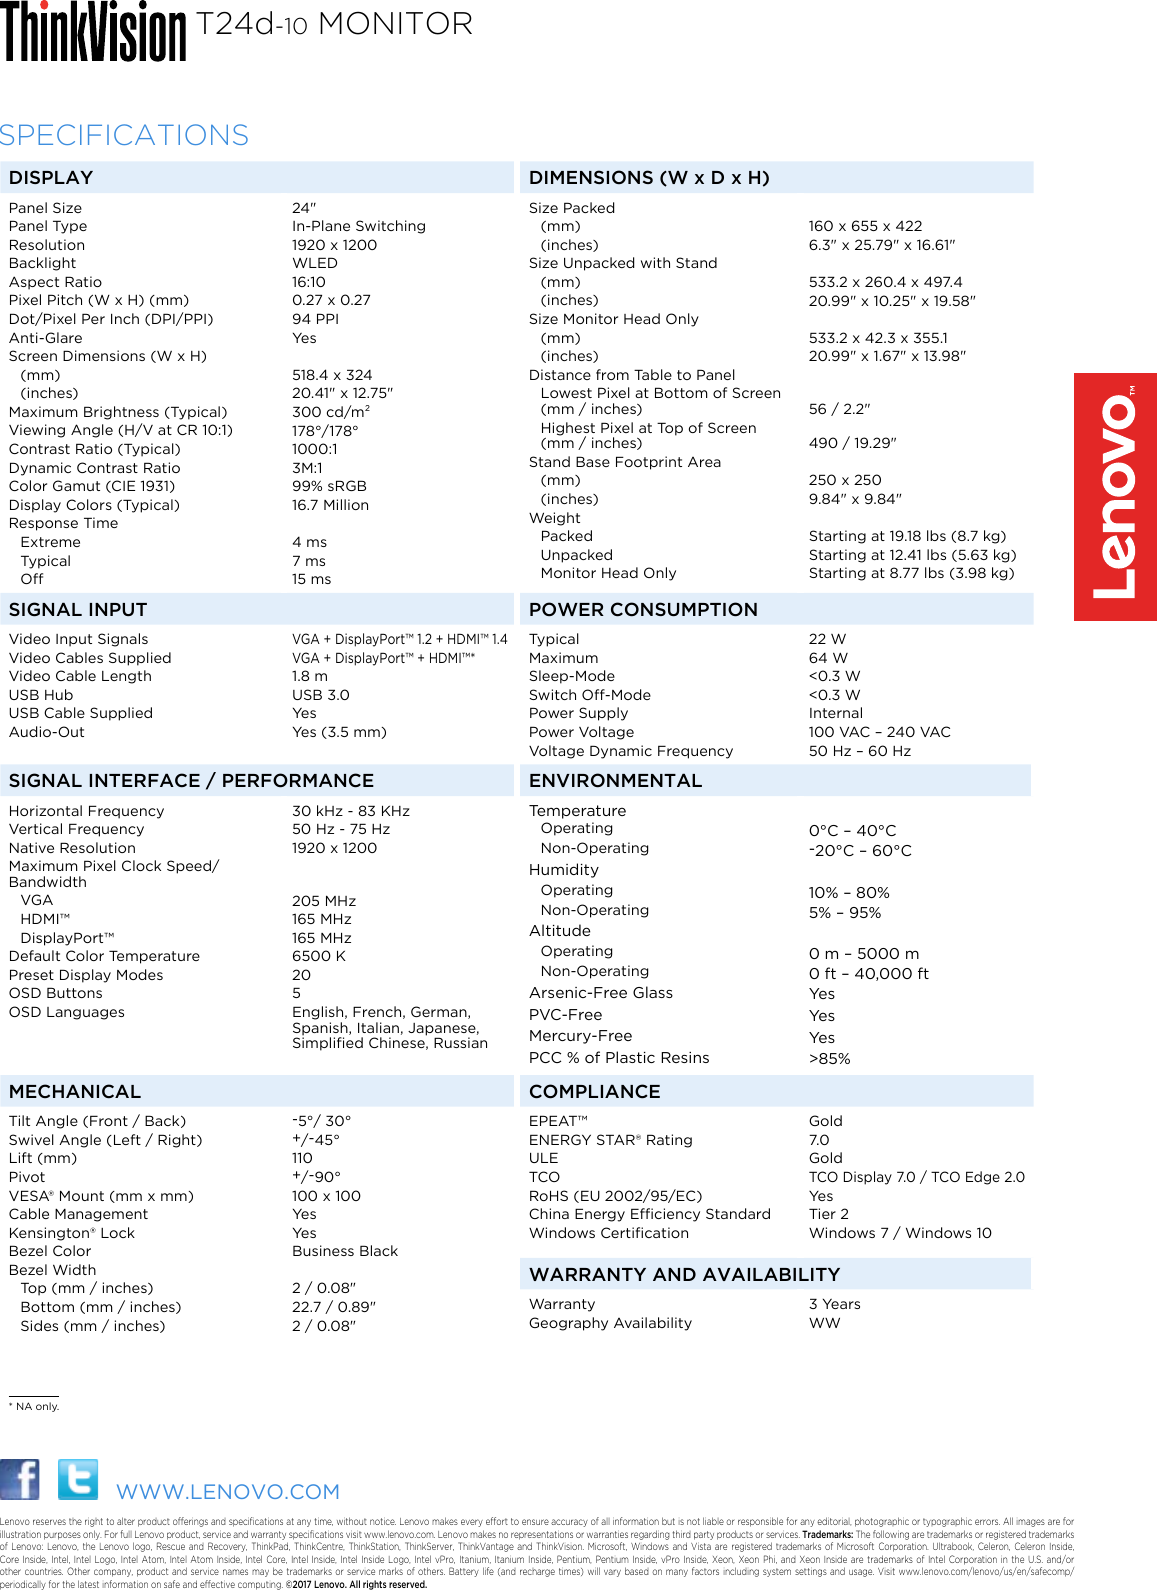 Page 2 of 2 - Lenovo T24D10 Overview ThinkVision T24d-10 Monitor User Manual Think Vision 24 Inch WUXGA IPS - Type 61B4